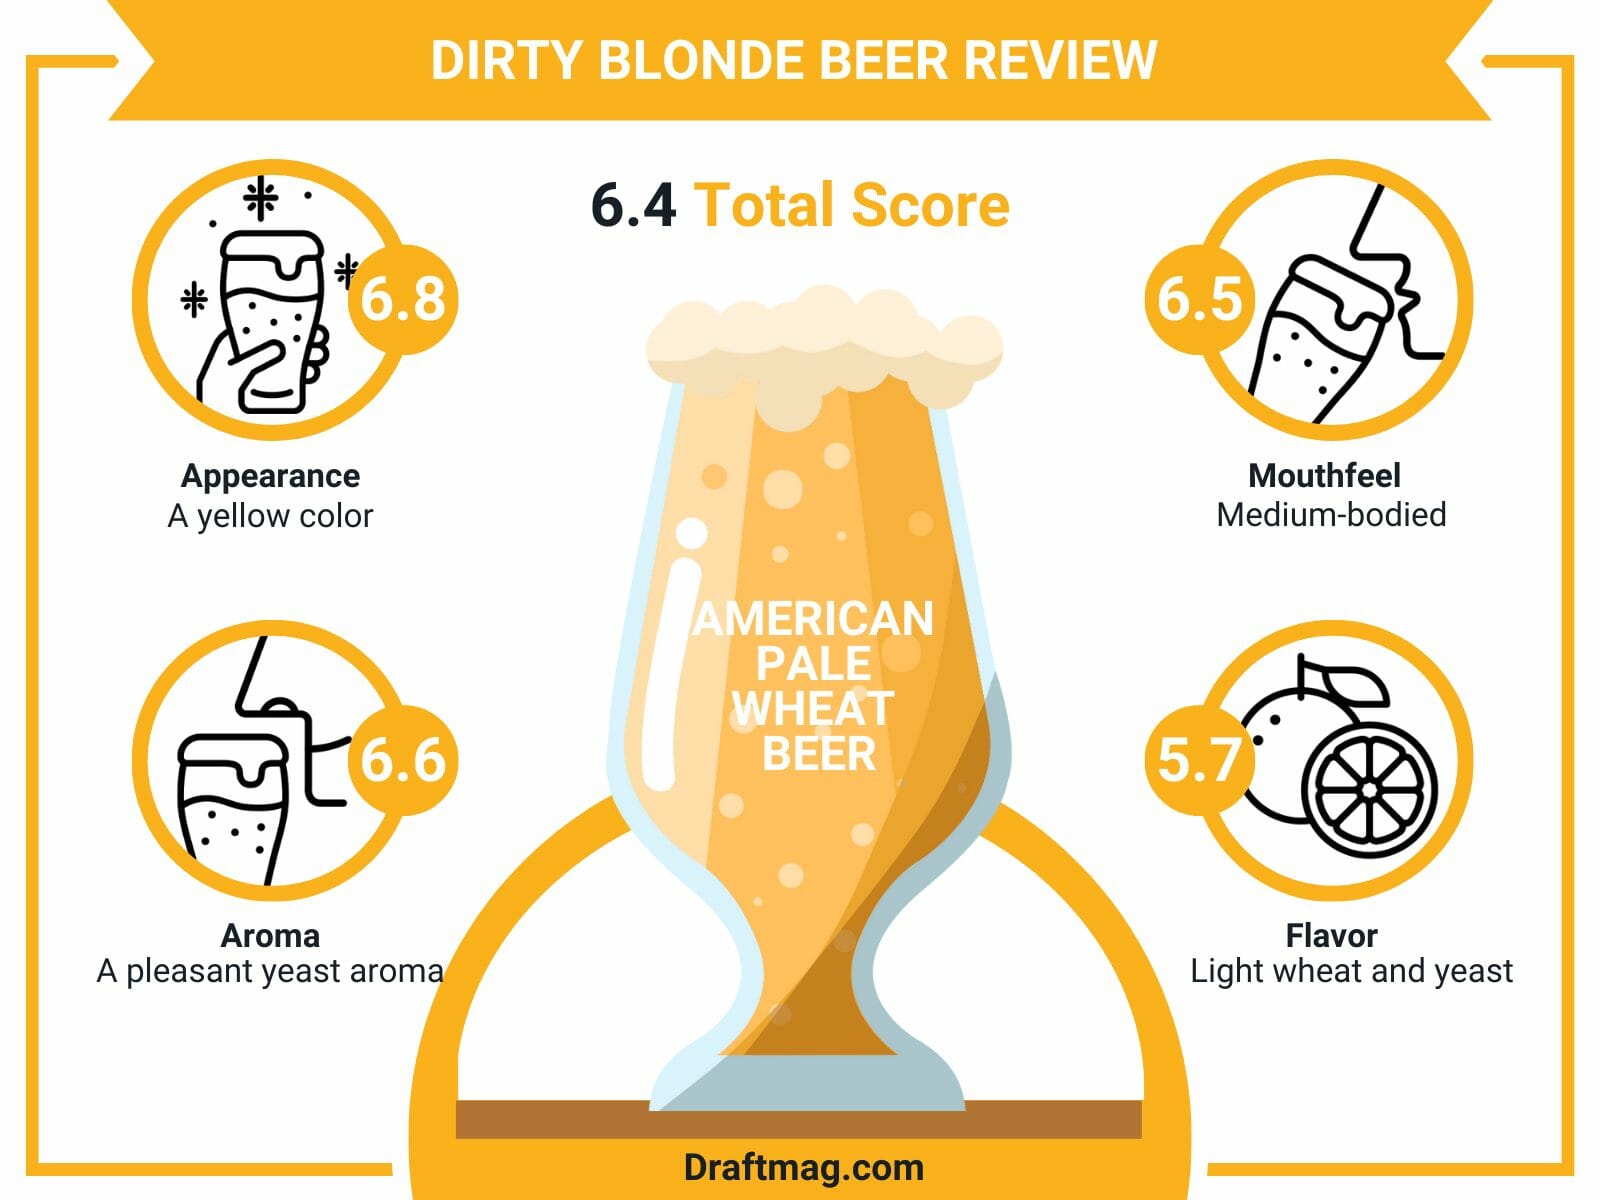 Dirty blonde beer review infographic